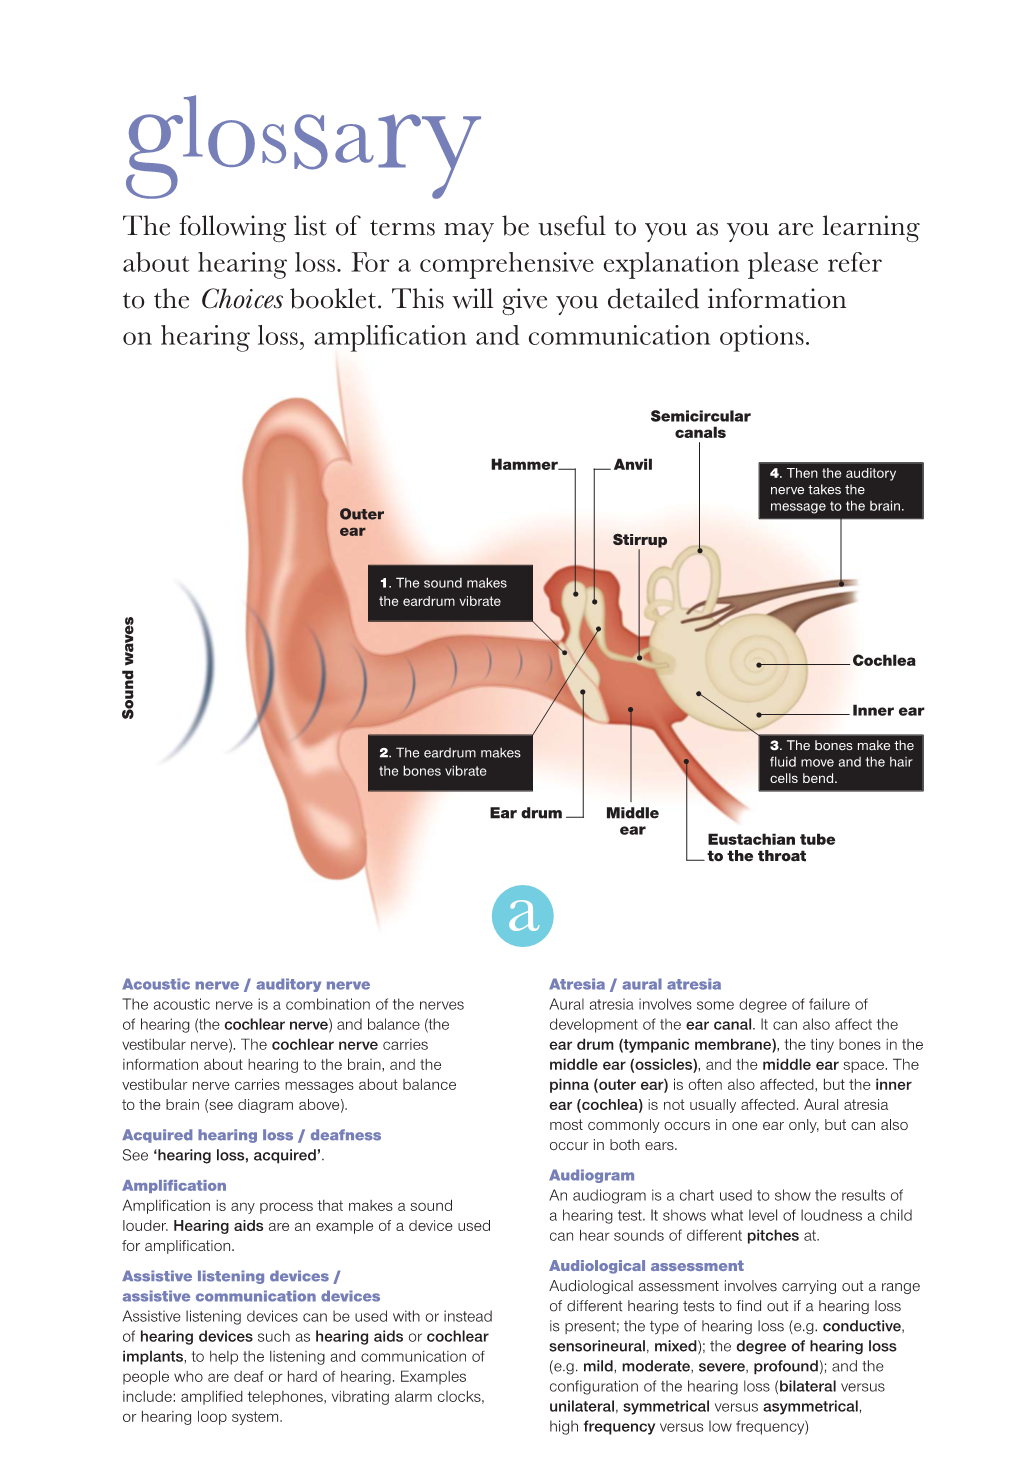 Glossary the Following List of Terms May Be Useful to You As You Are Learning About Hearing Loss